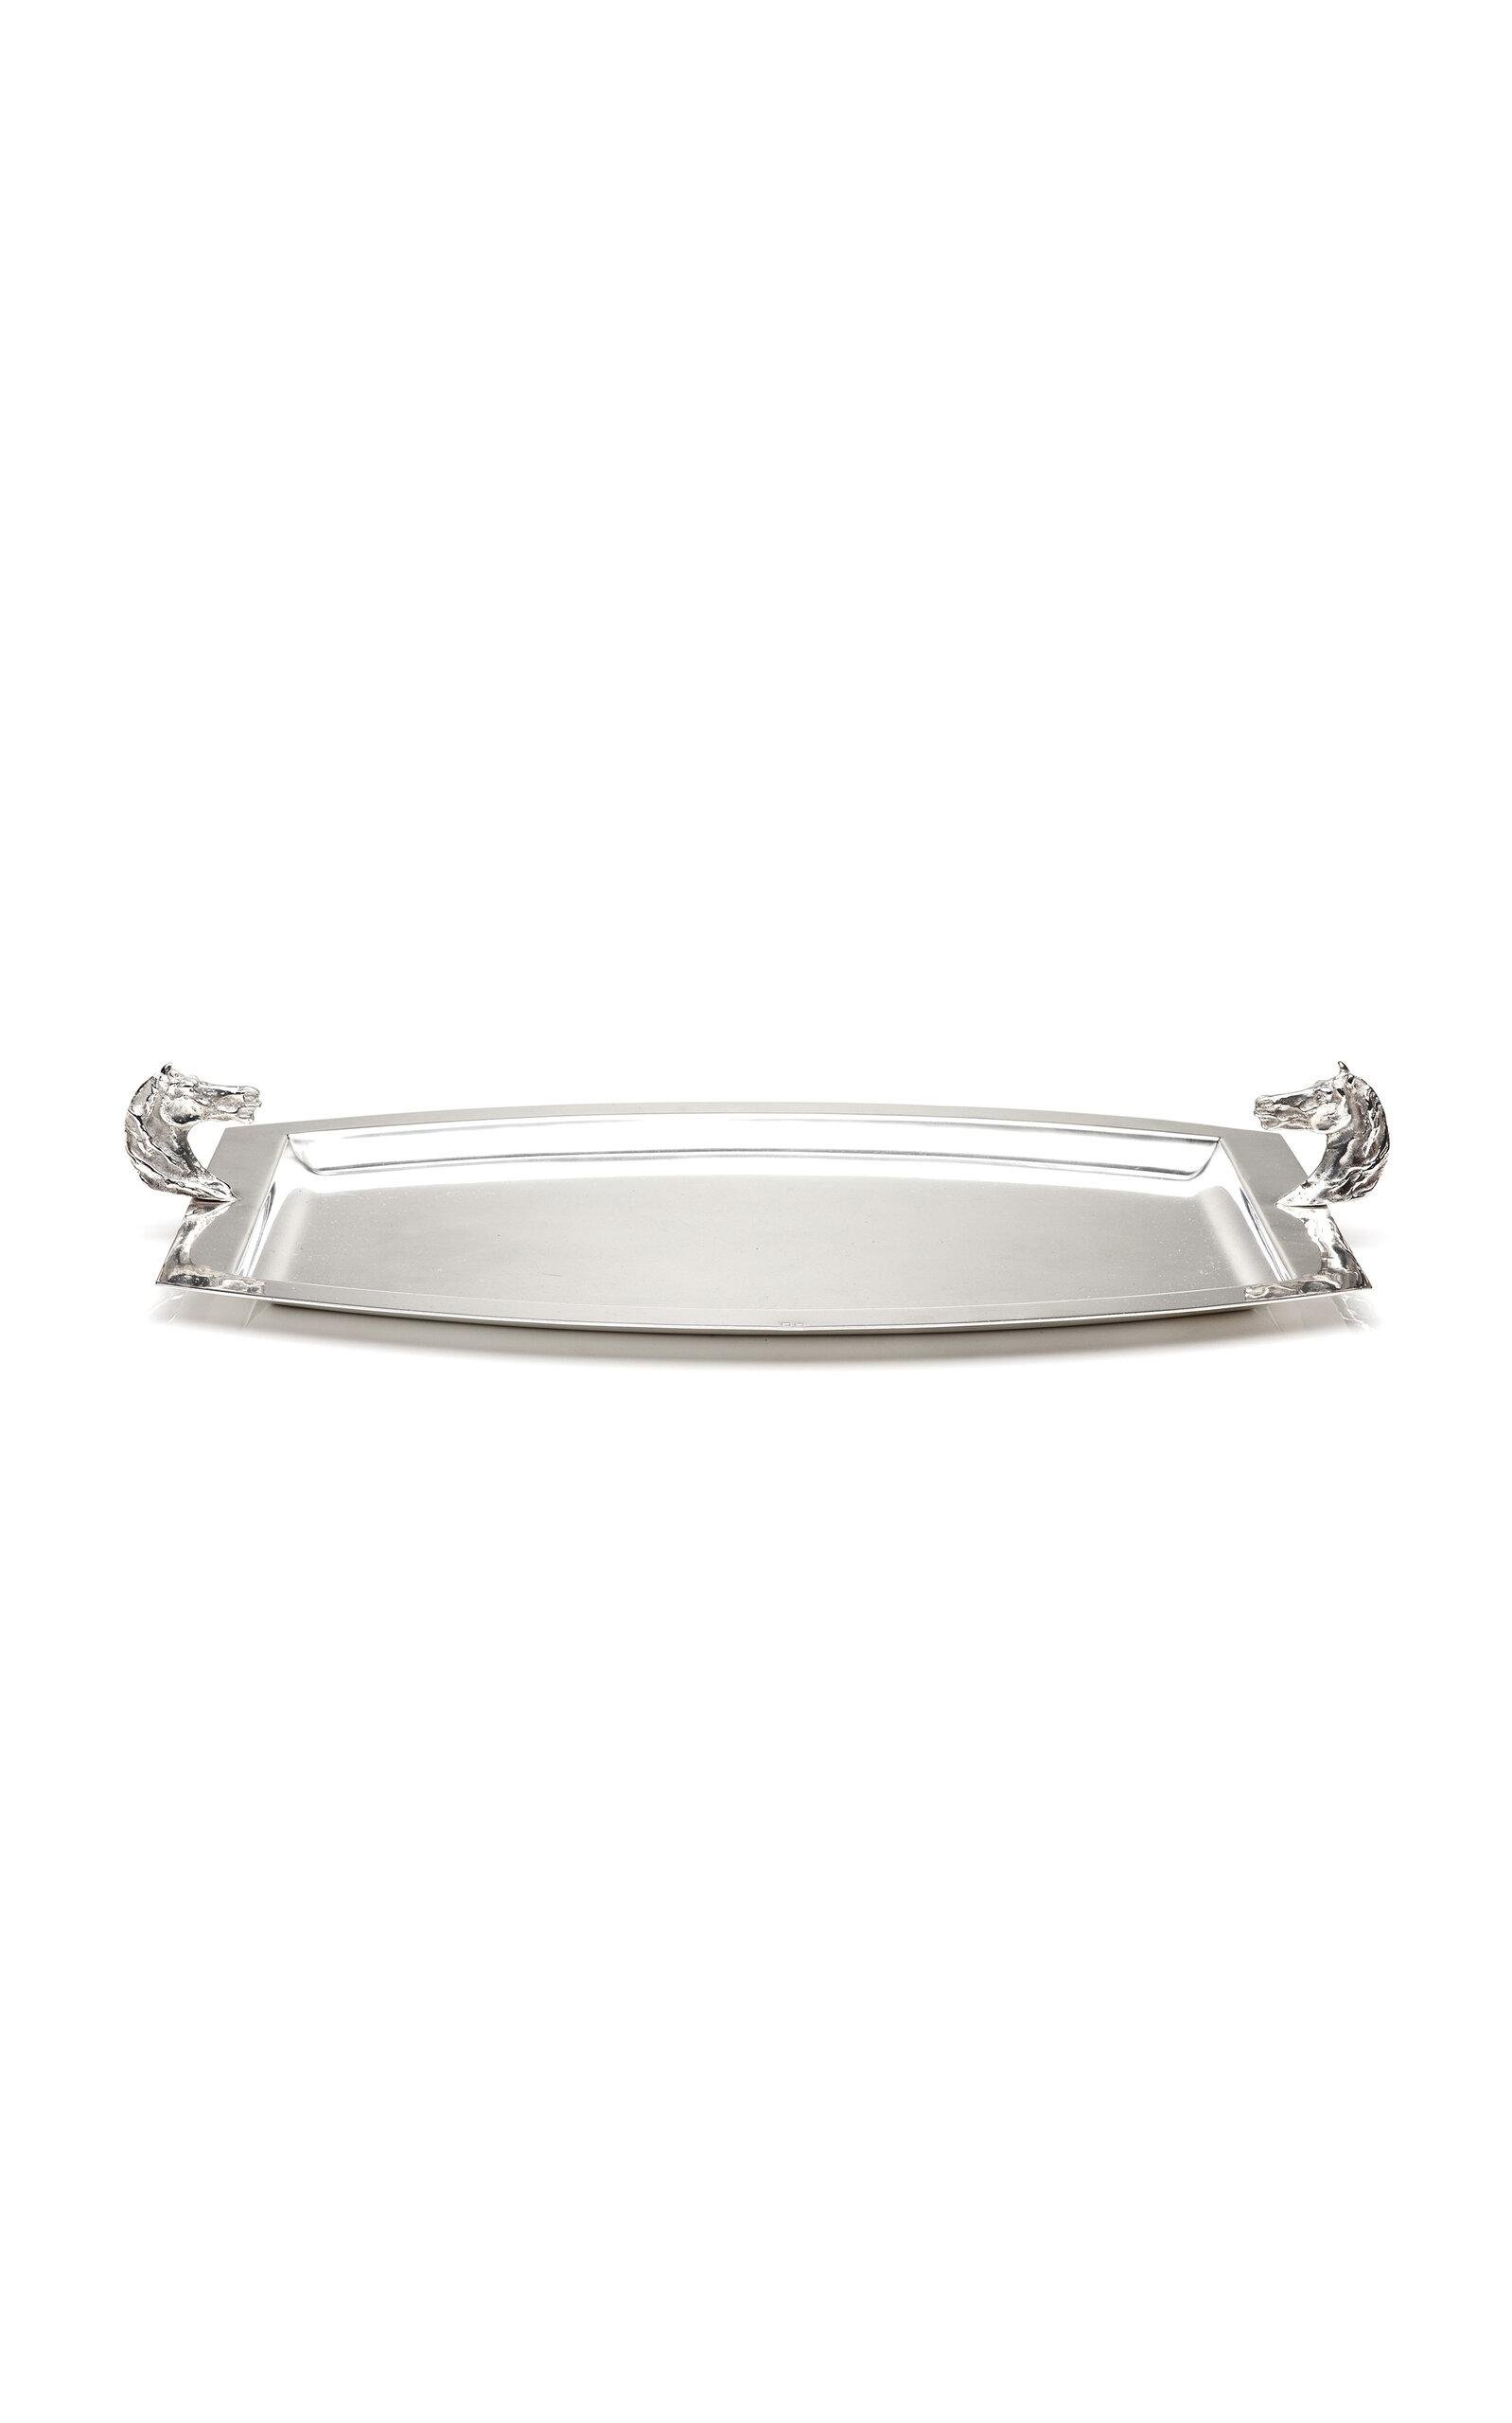 Mantiques Modern - Silver French Horse Head Tray - Silver - Moda Operandi by MANTIQUES MODERN